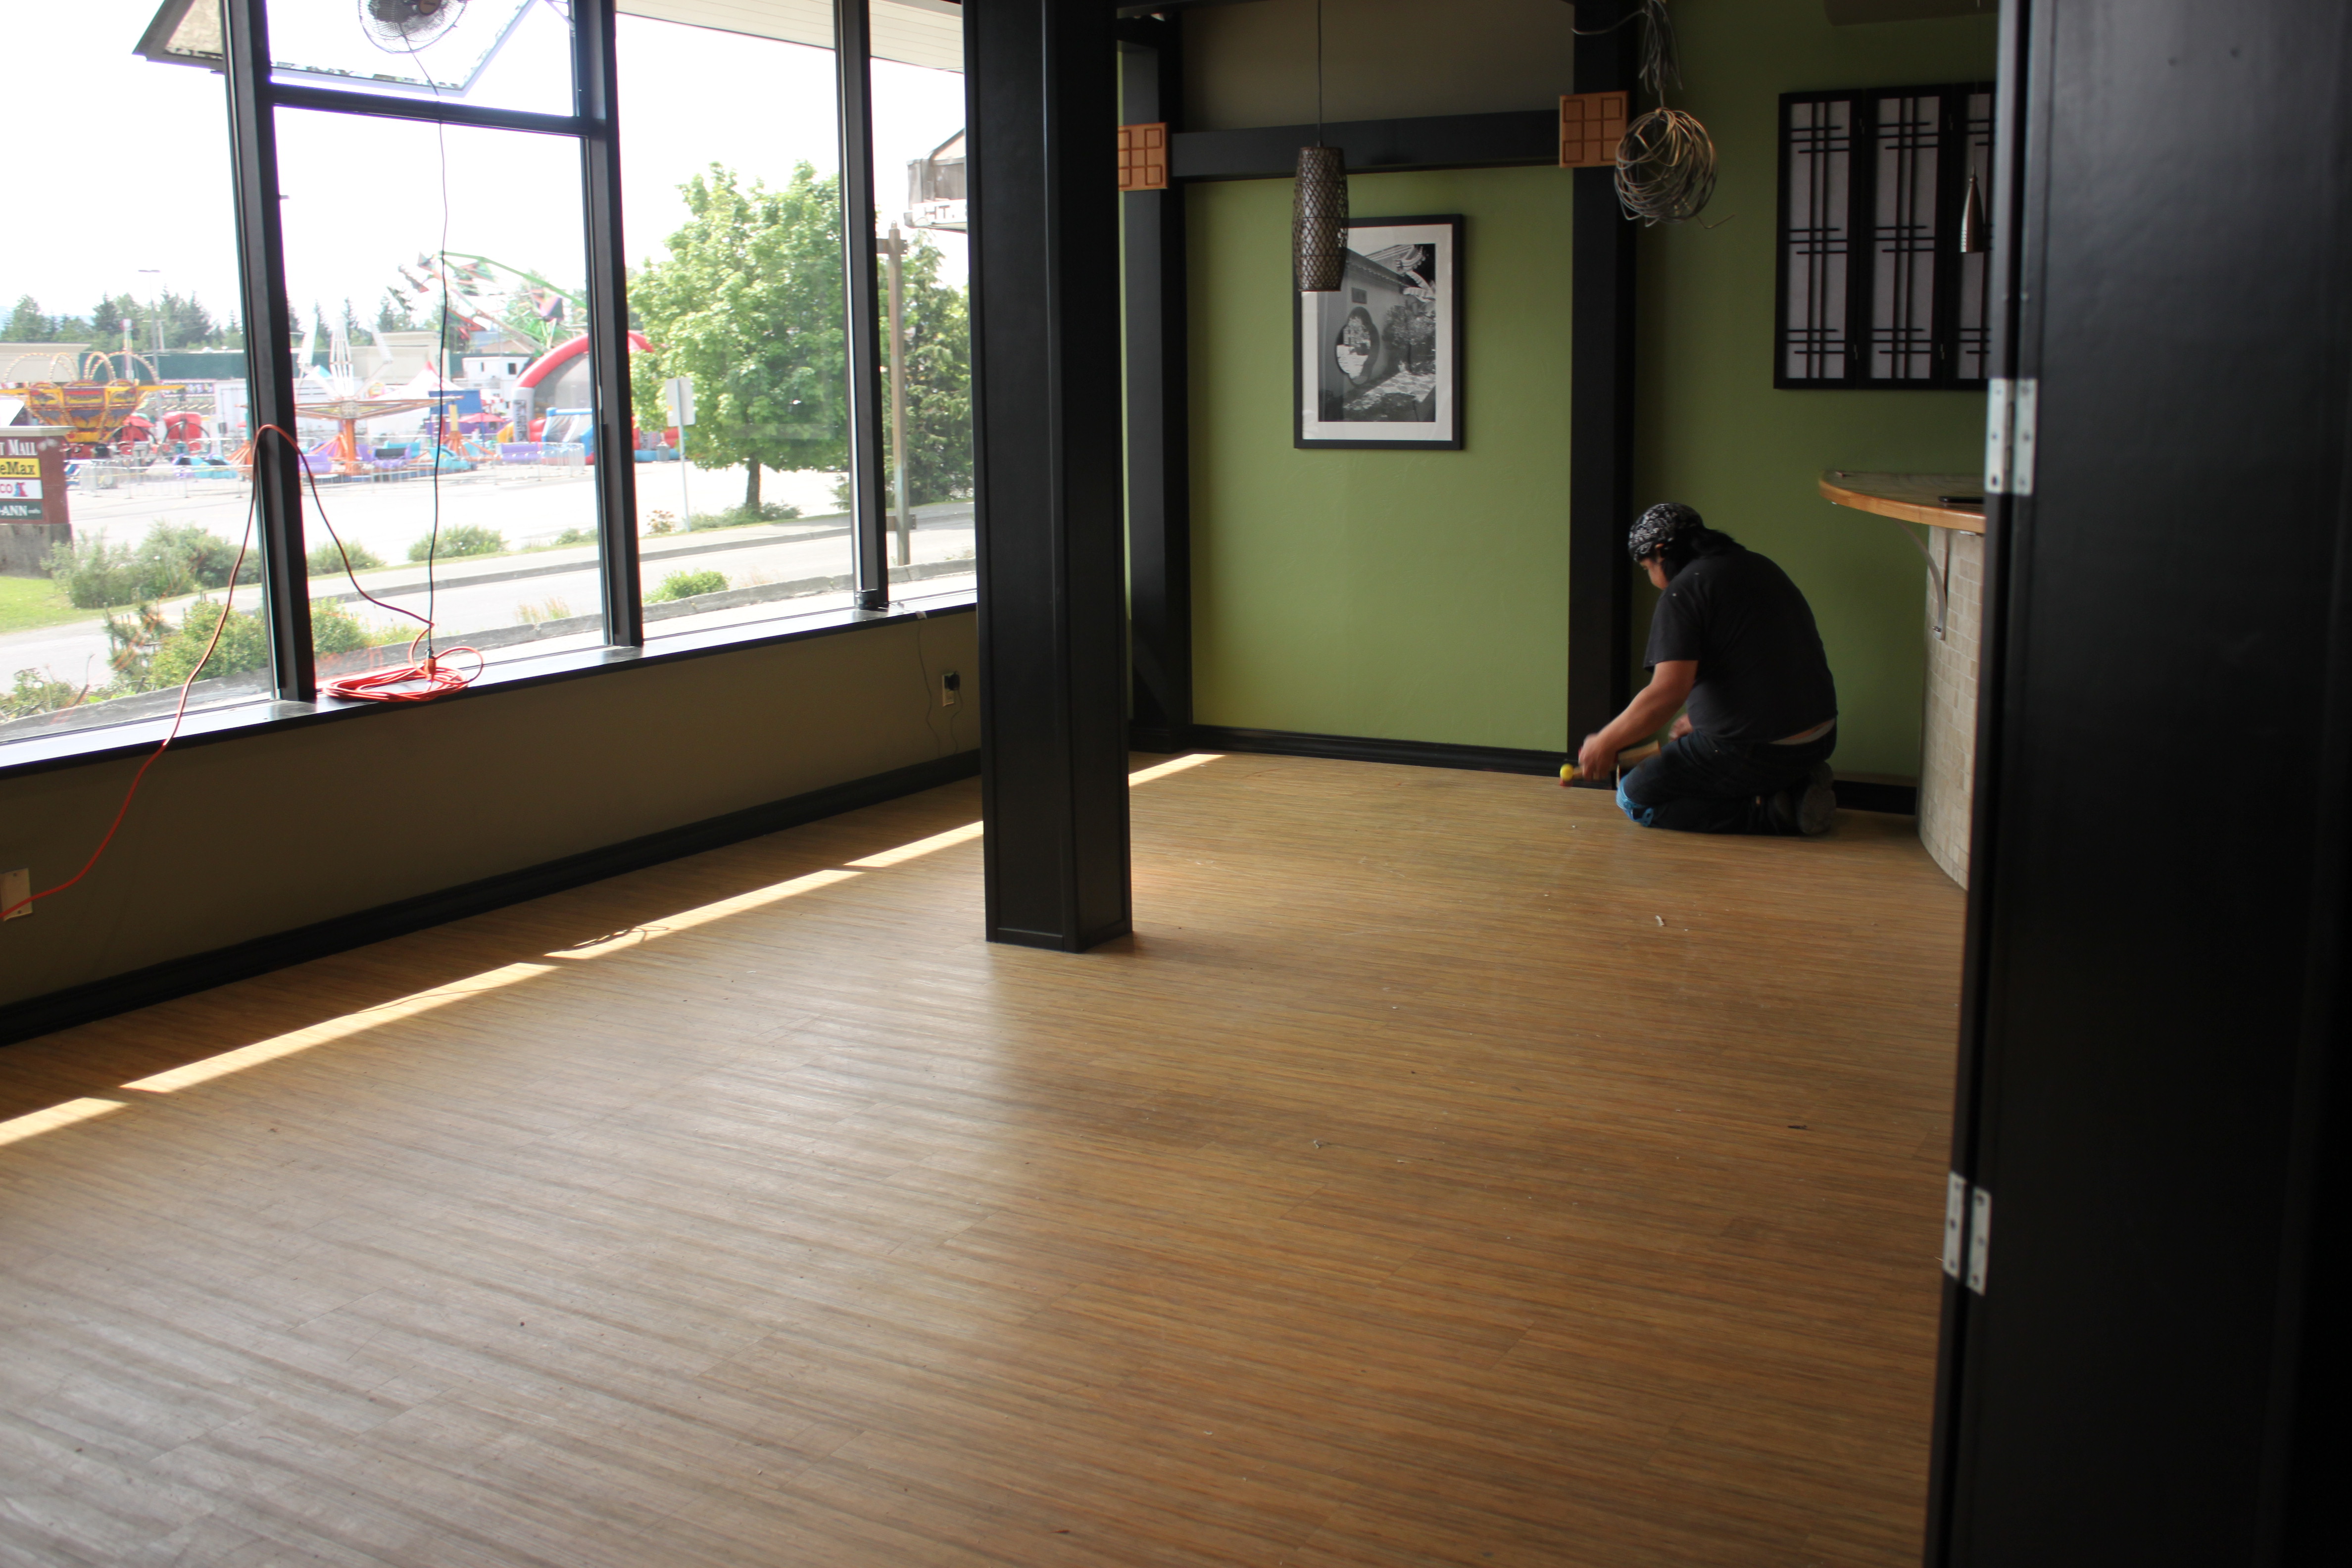 George Wright is paying to have new floors put in Canton House. (Photo by Lisa Phu/KTOO)